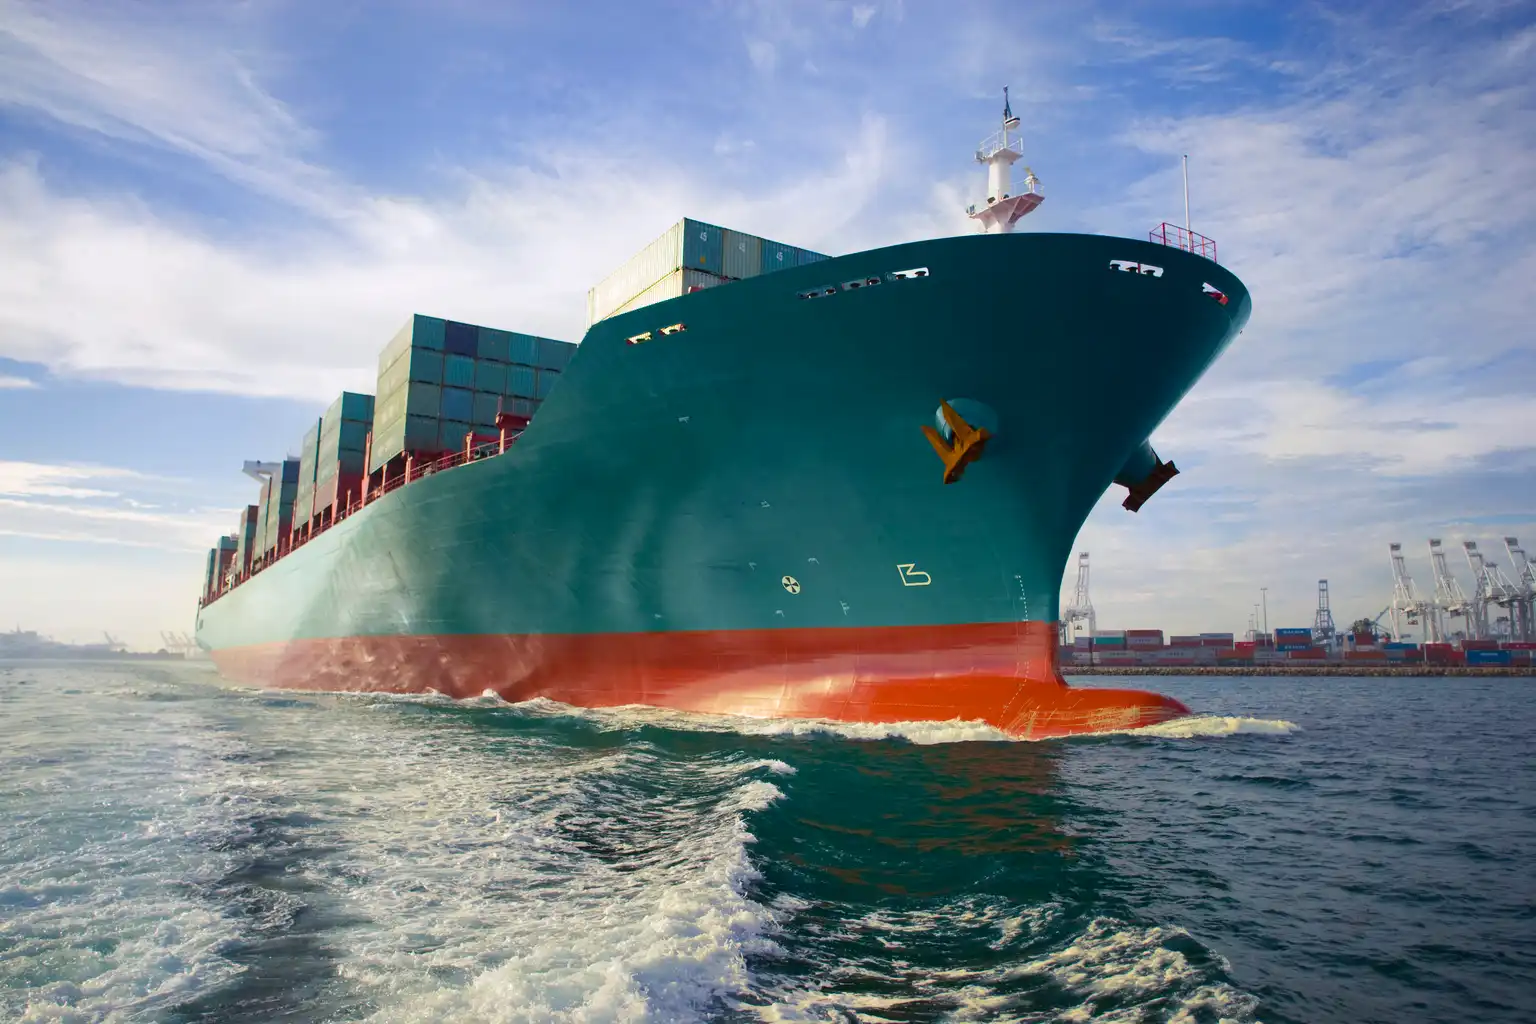 Global Ship Lease Stock Looks Good, But I Have Some Concerns - Seeking Alpha